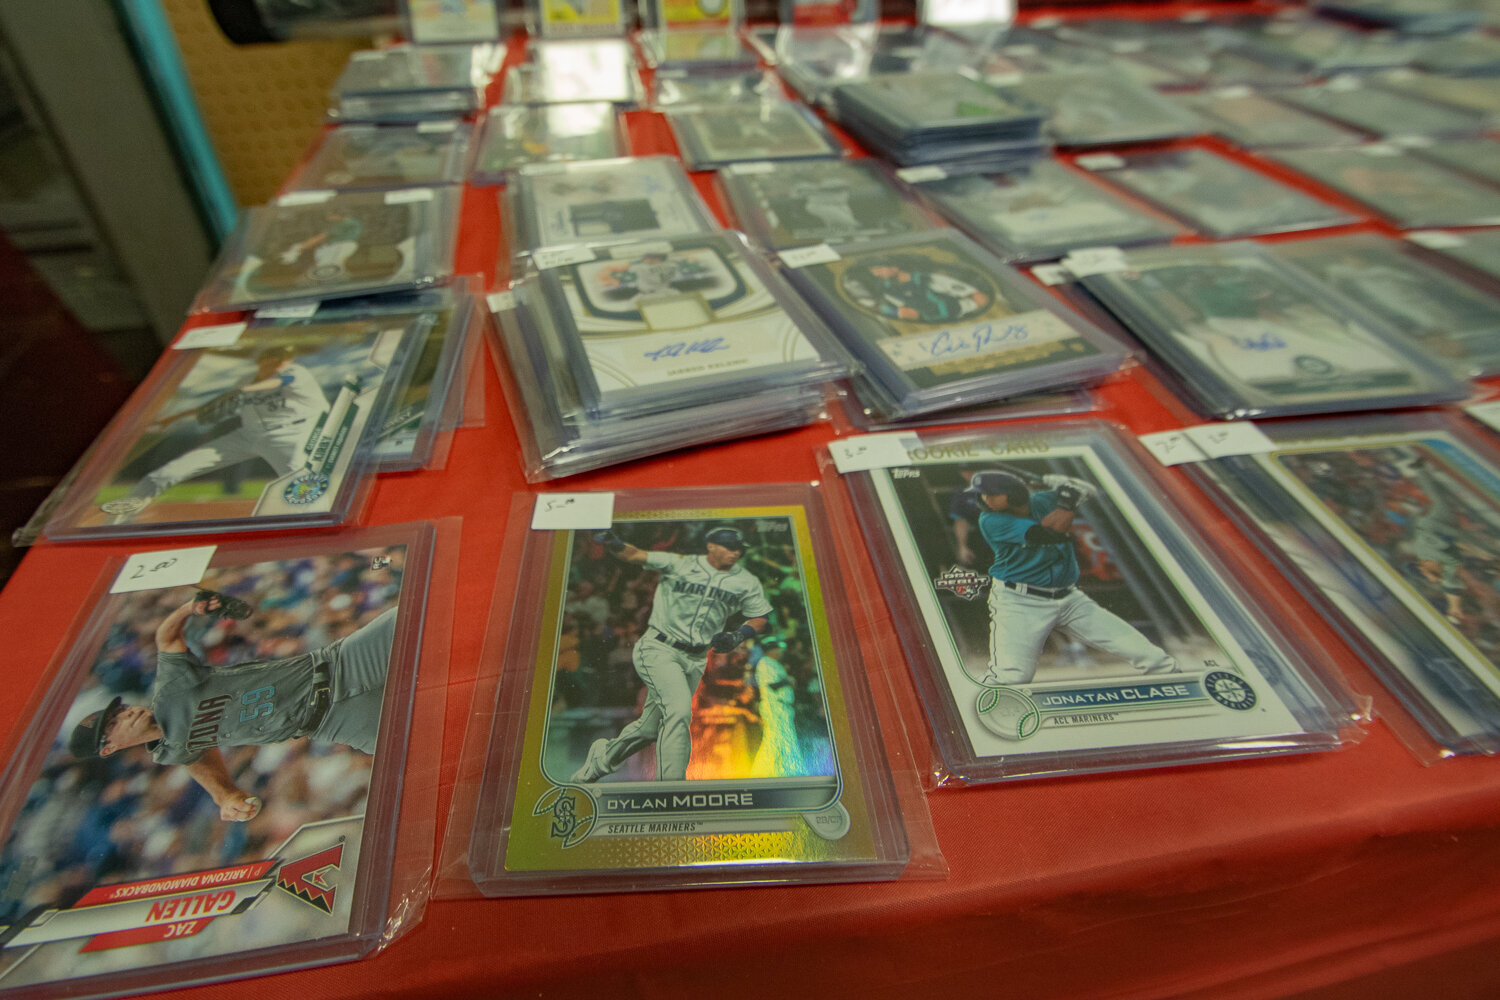 Baseball cards are seen for sale at the inaugural Keiper's Cards and Memorabilia Show on Saturday, Sept. 2, at the Tower Mall, located at 320 N. Tower Ave. in Centralia